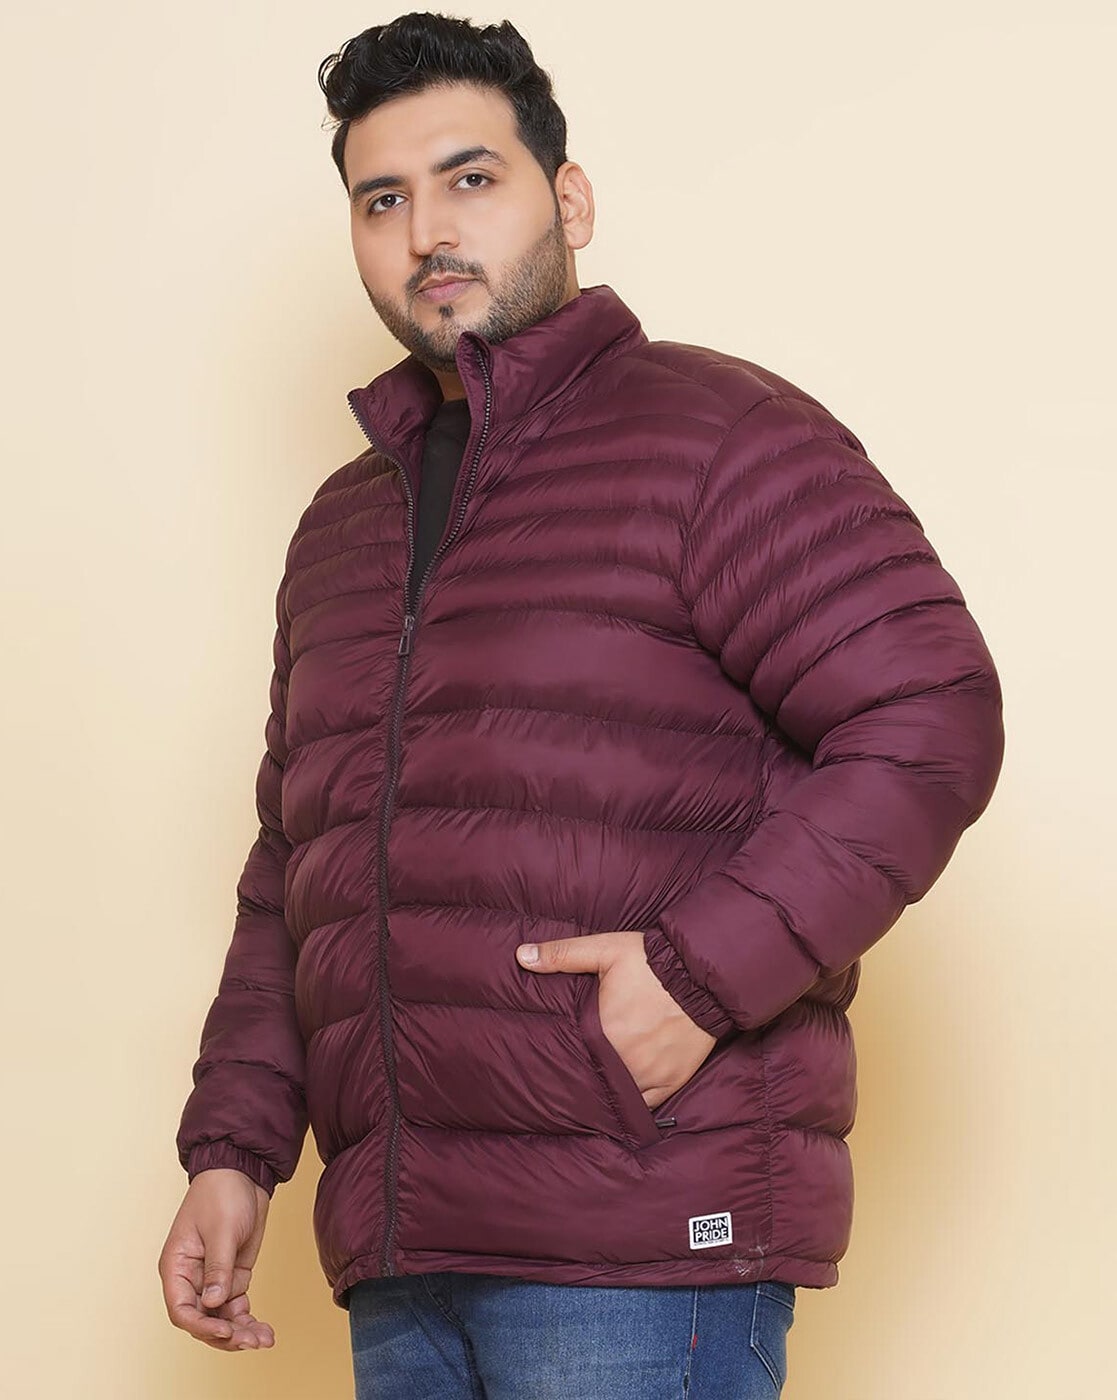 Mens Cotton Blend Ajio Winter Jackets Mens With Zipper Casual Thick Outwear  For Asia Clothing Z230710 From Baofu001, $11.32 | DHgate.Com